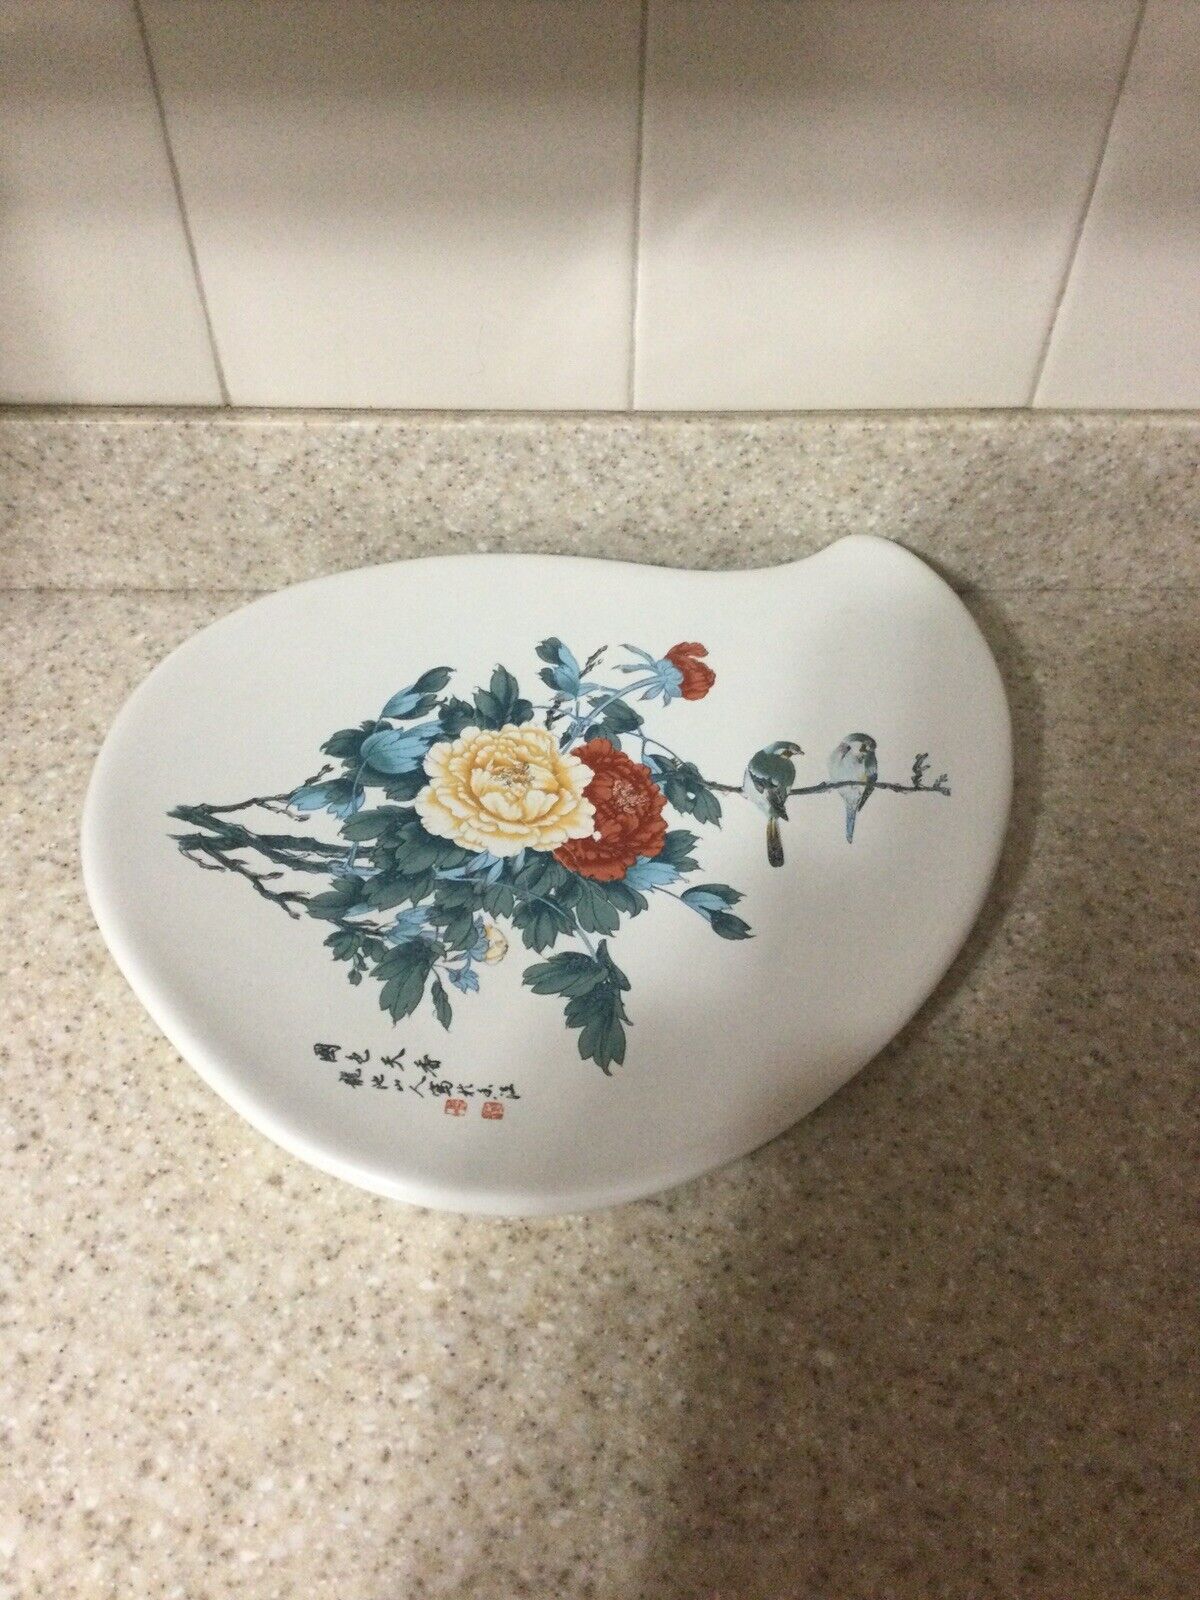  Rare Vintage Hand-painted  Decorative Plate Birds & Flowering Branch 